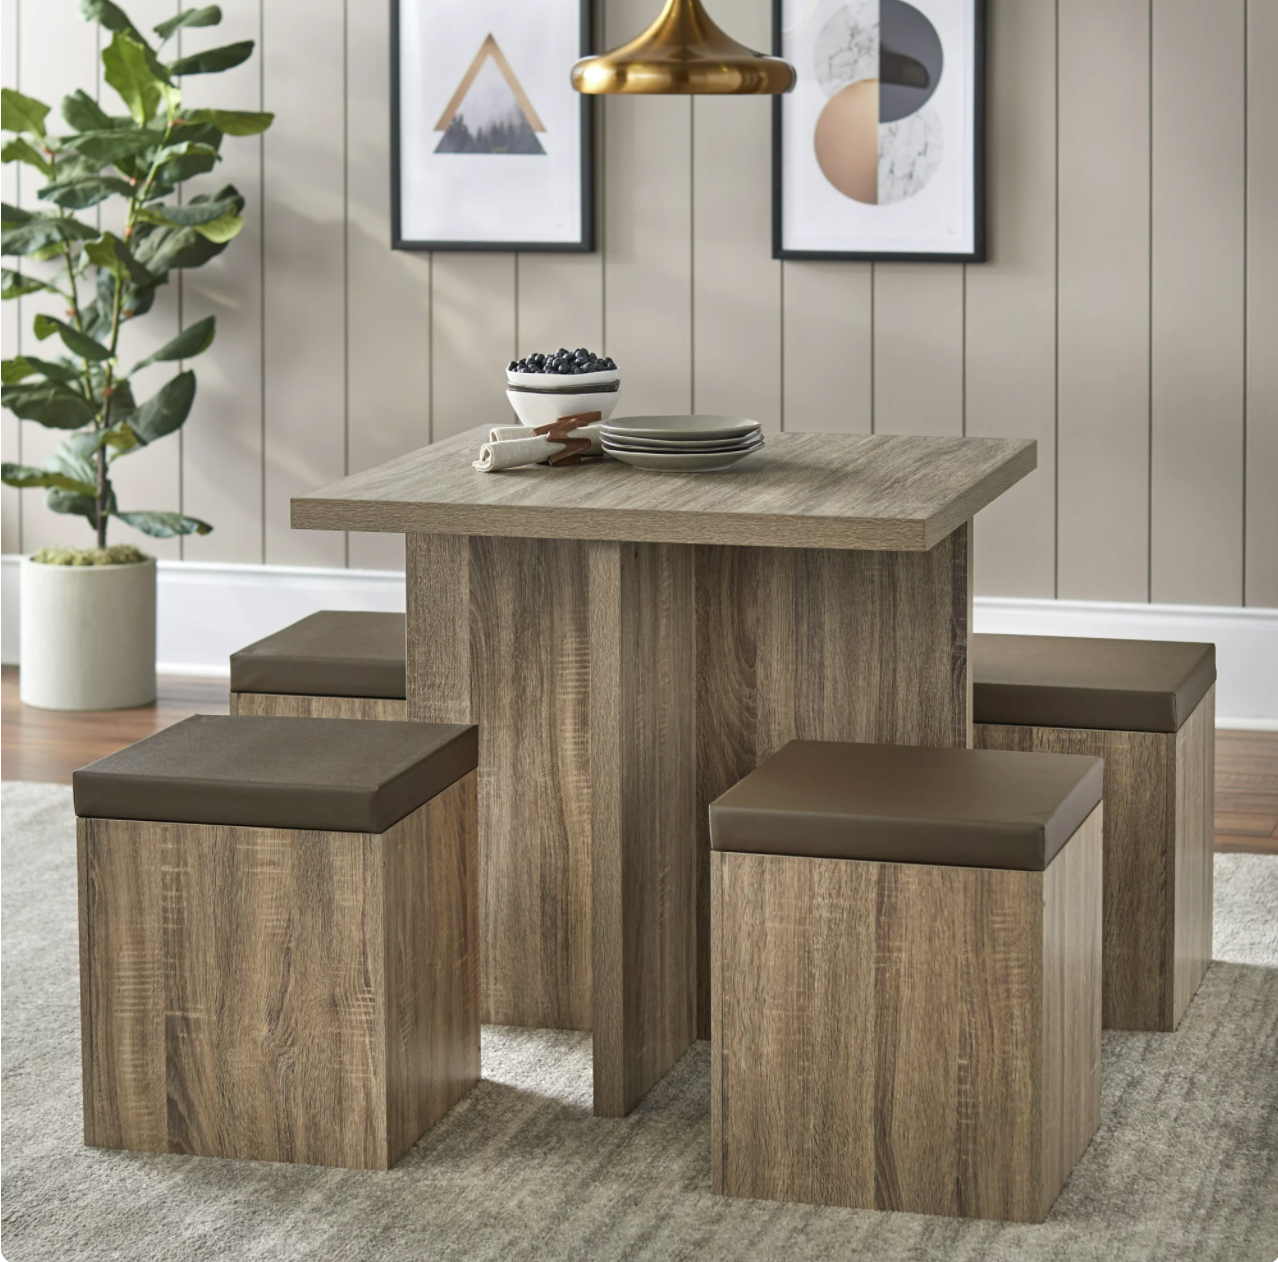 Five-piece dining set with storage